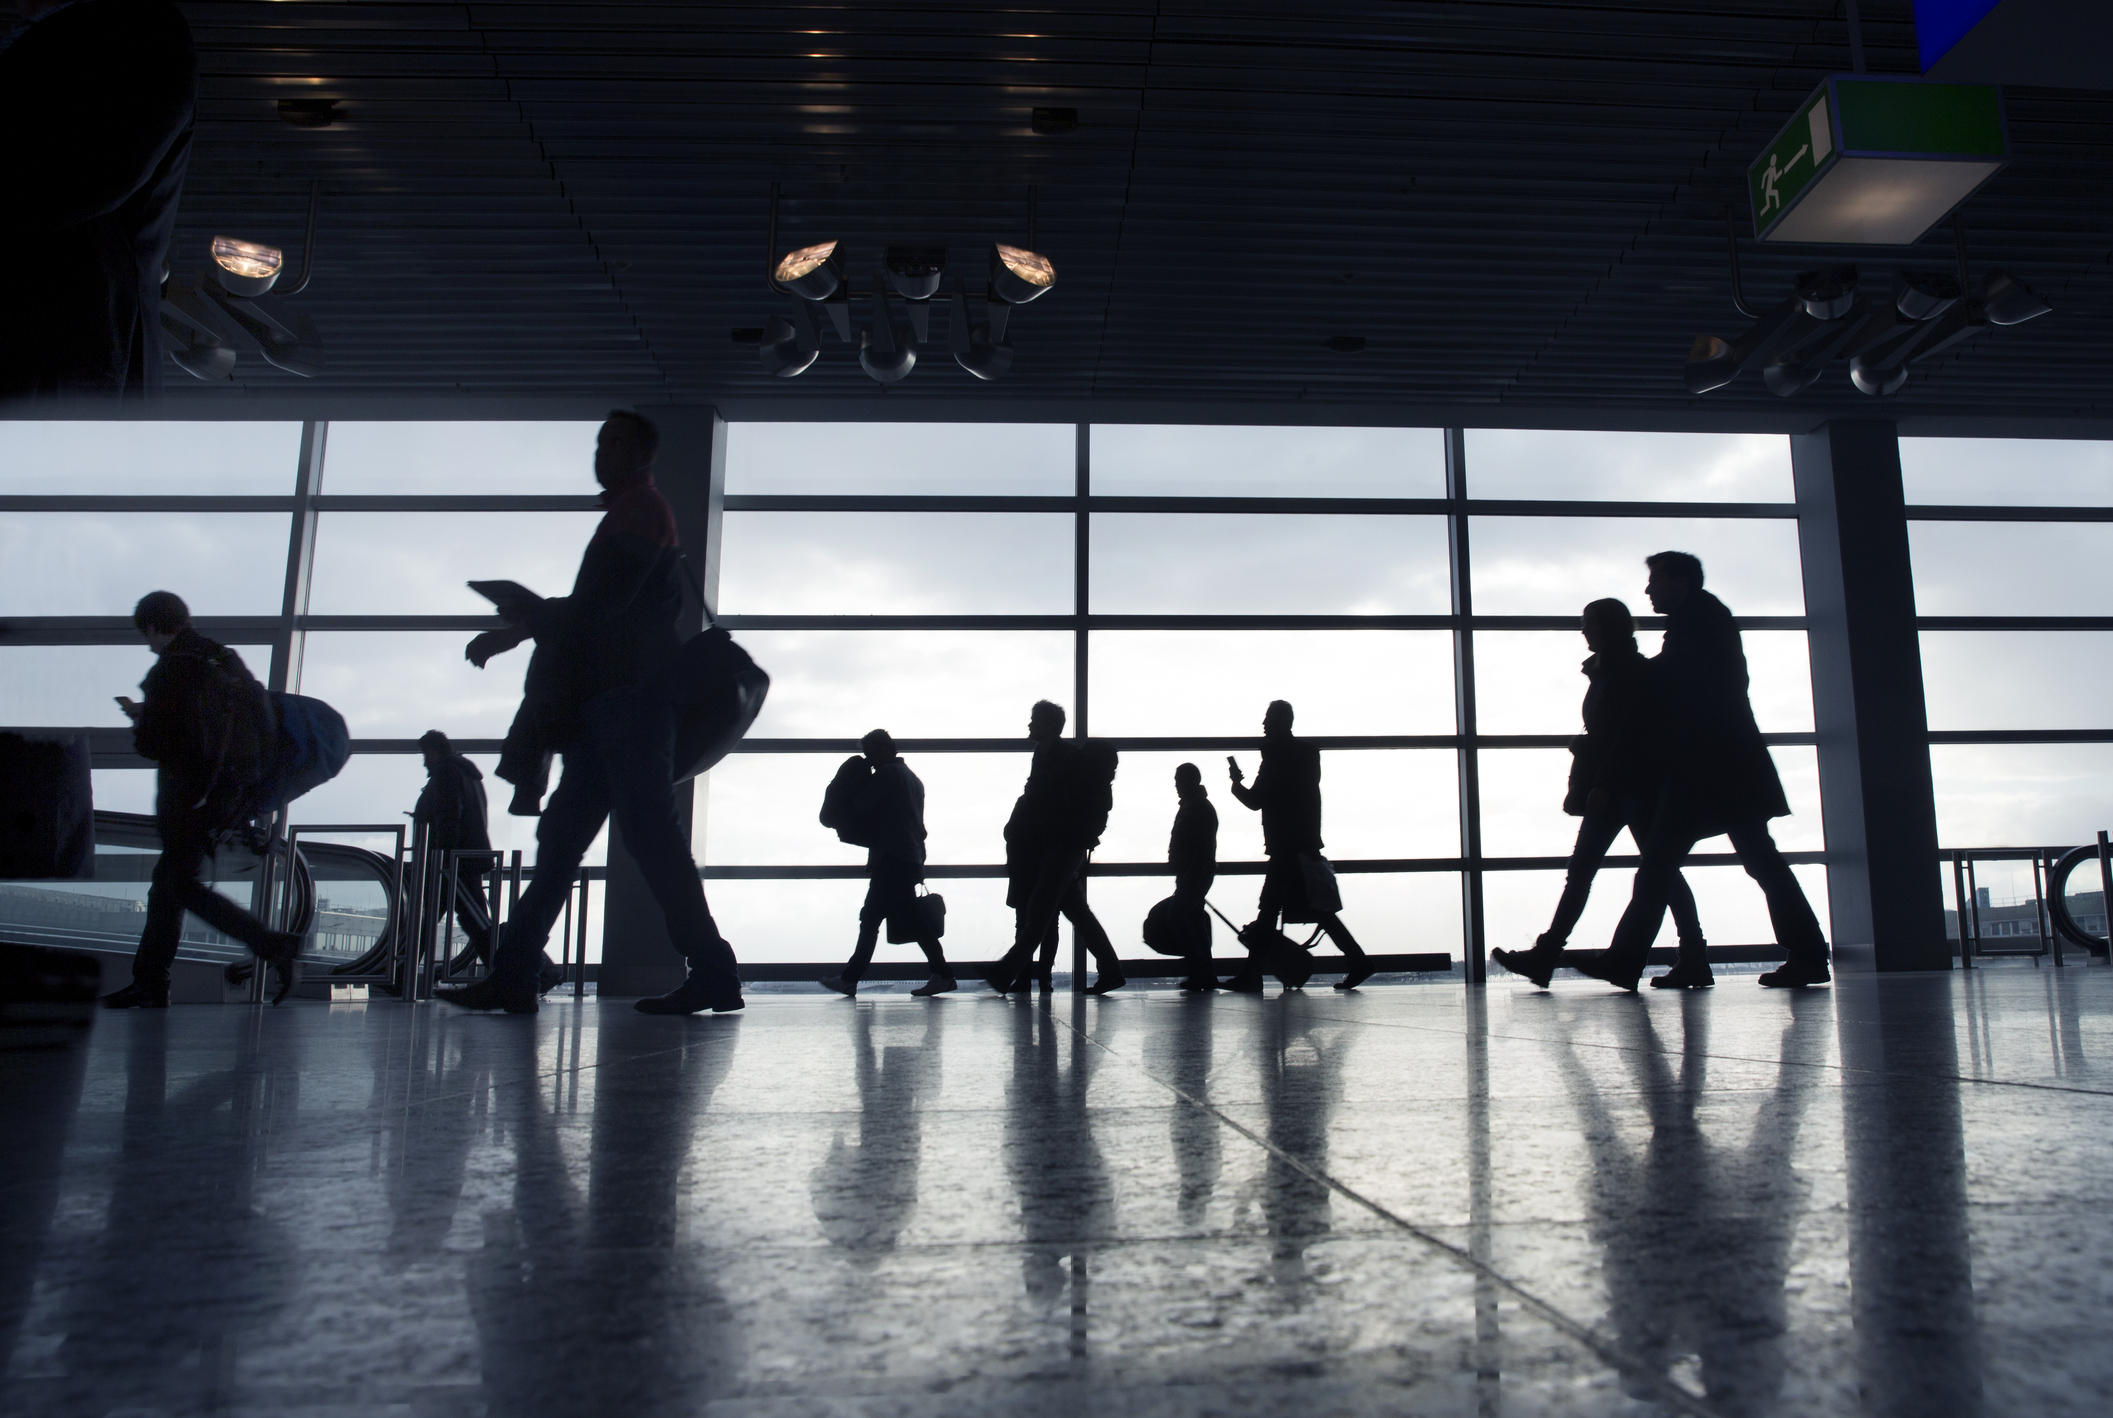 Silhouetted figures walking in an airport